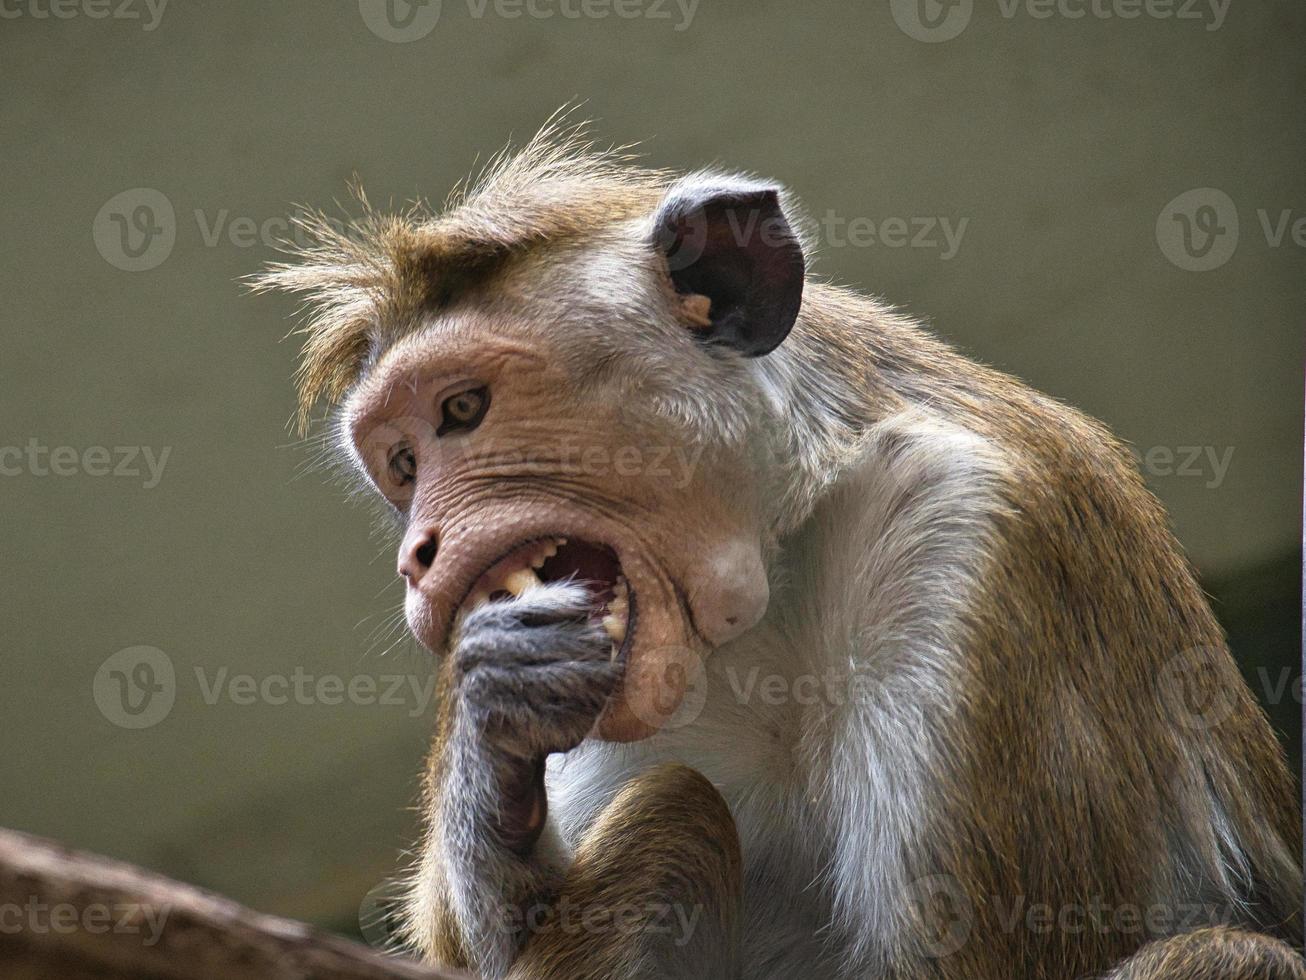 Rhesus monkey sitting on a branch and nibbling his hand. animal photo